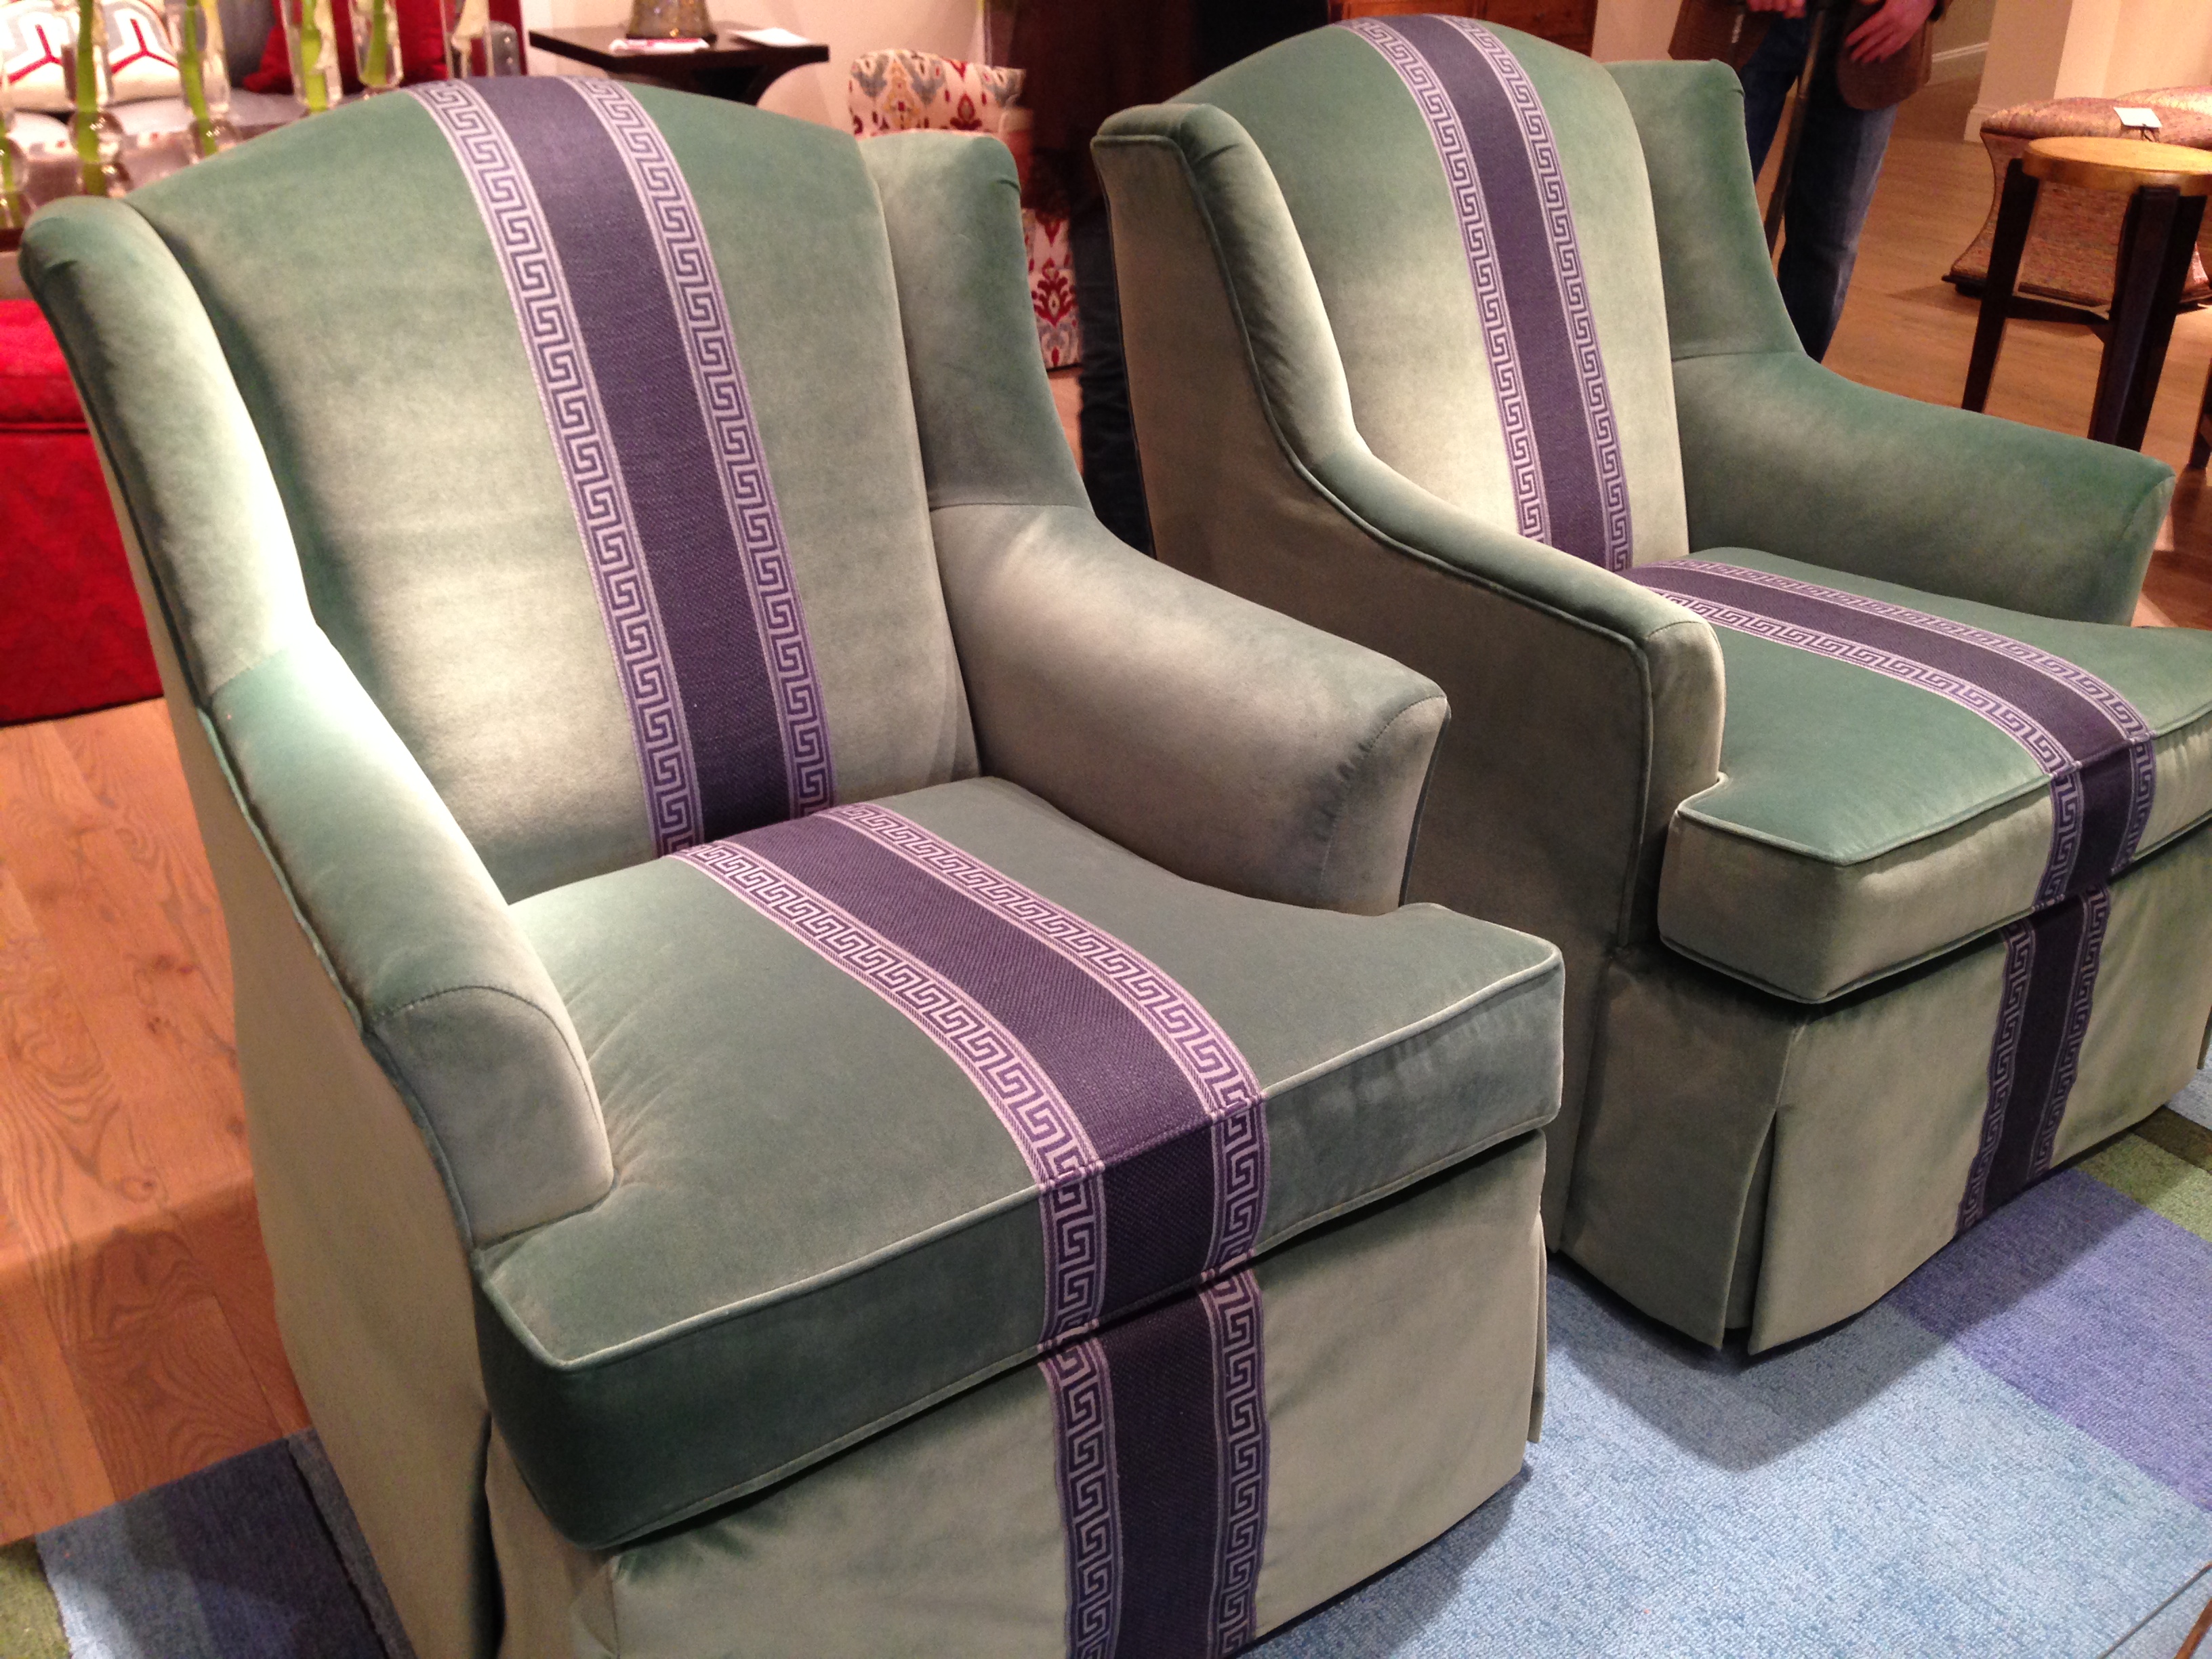 Velvet Chairs with Purple Greek Key Trim @ Wesley Hall | #hpmkt Spring 2014 | via Interiors For Families